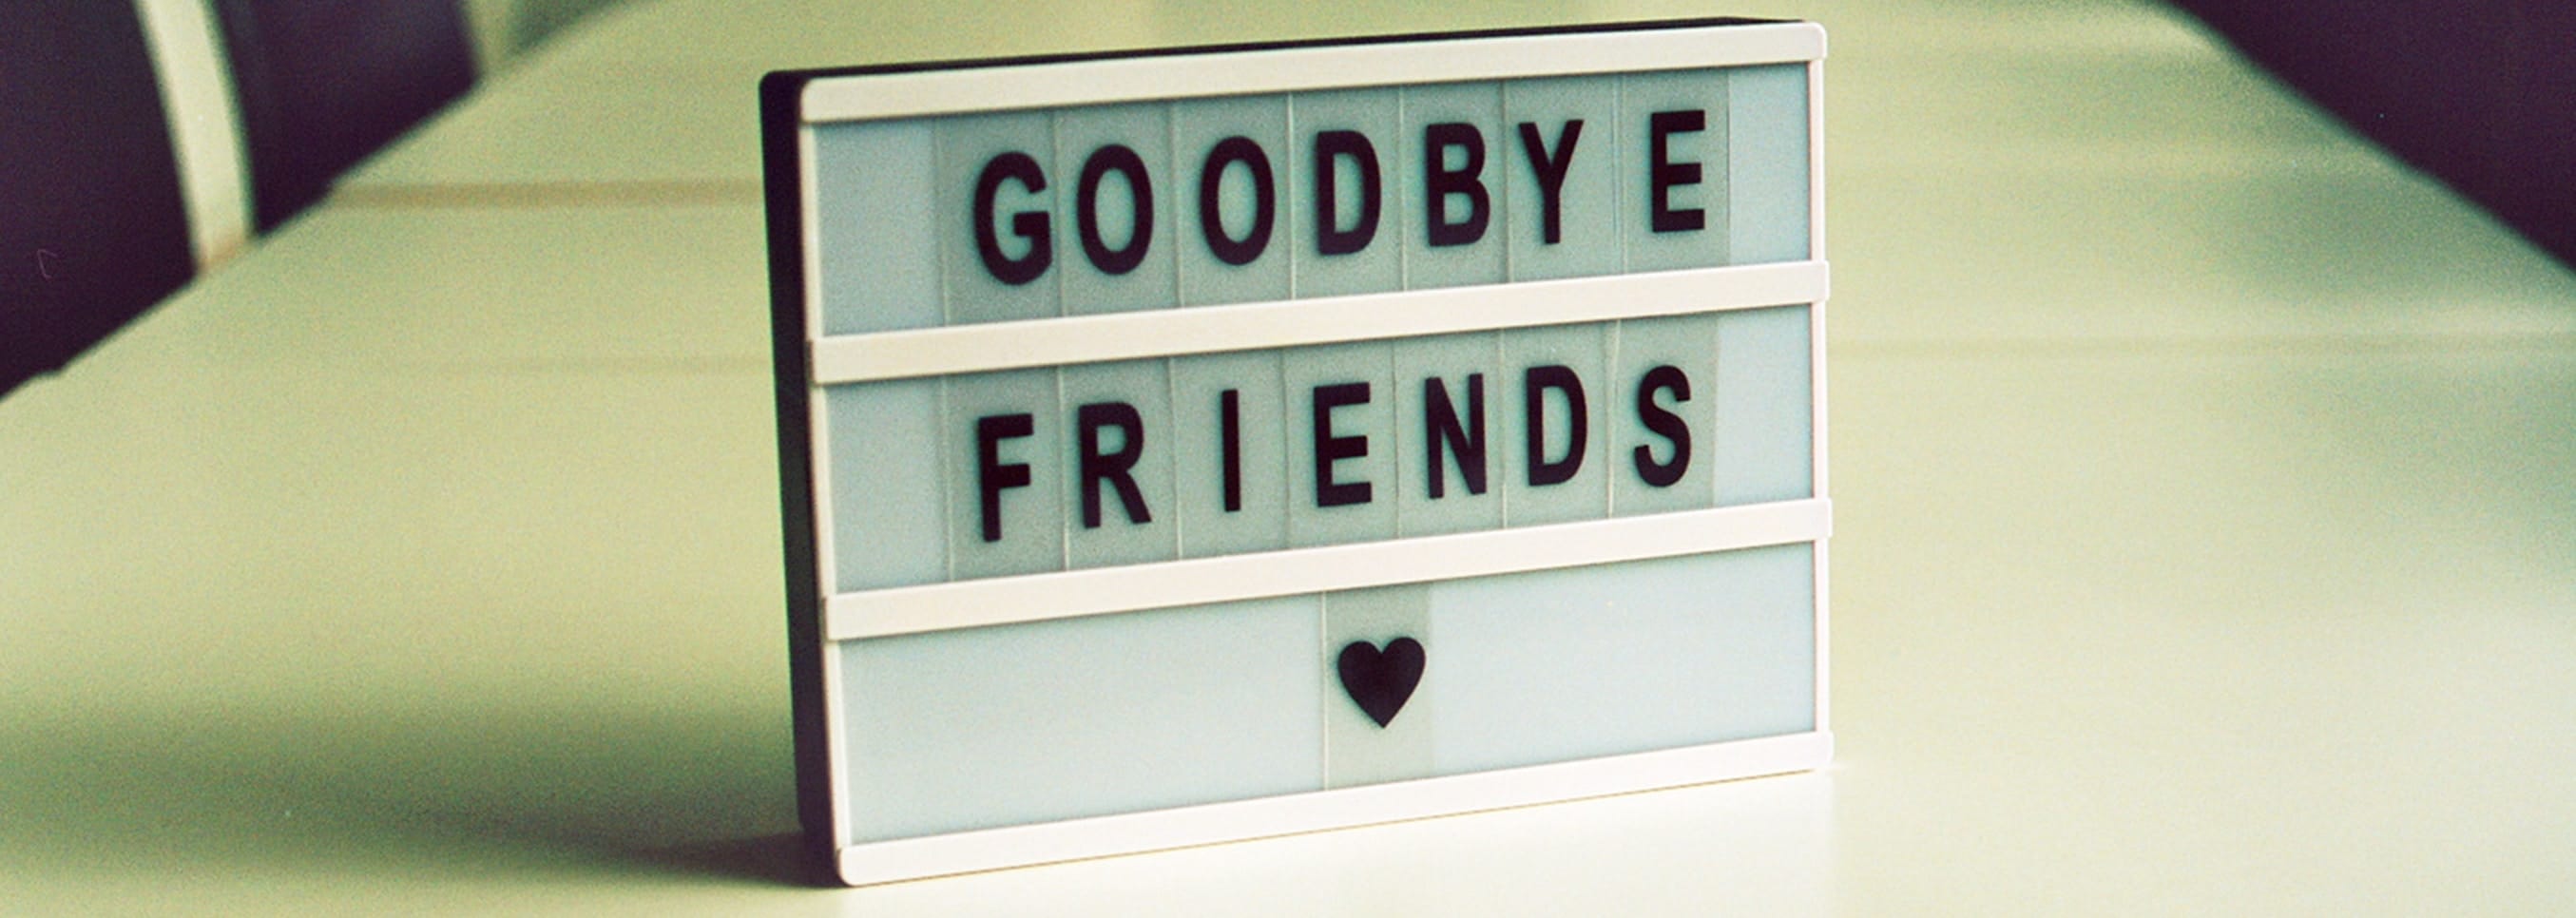 A cinema light box showing the words "Goodbye Friends"